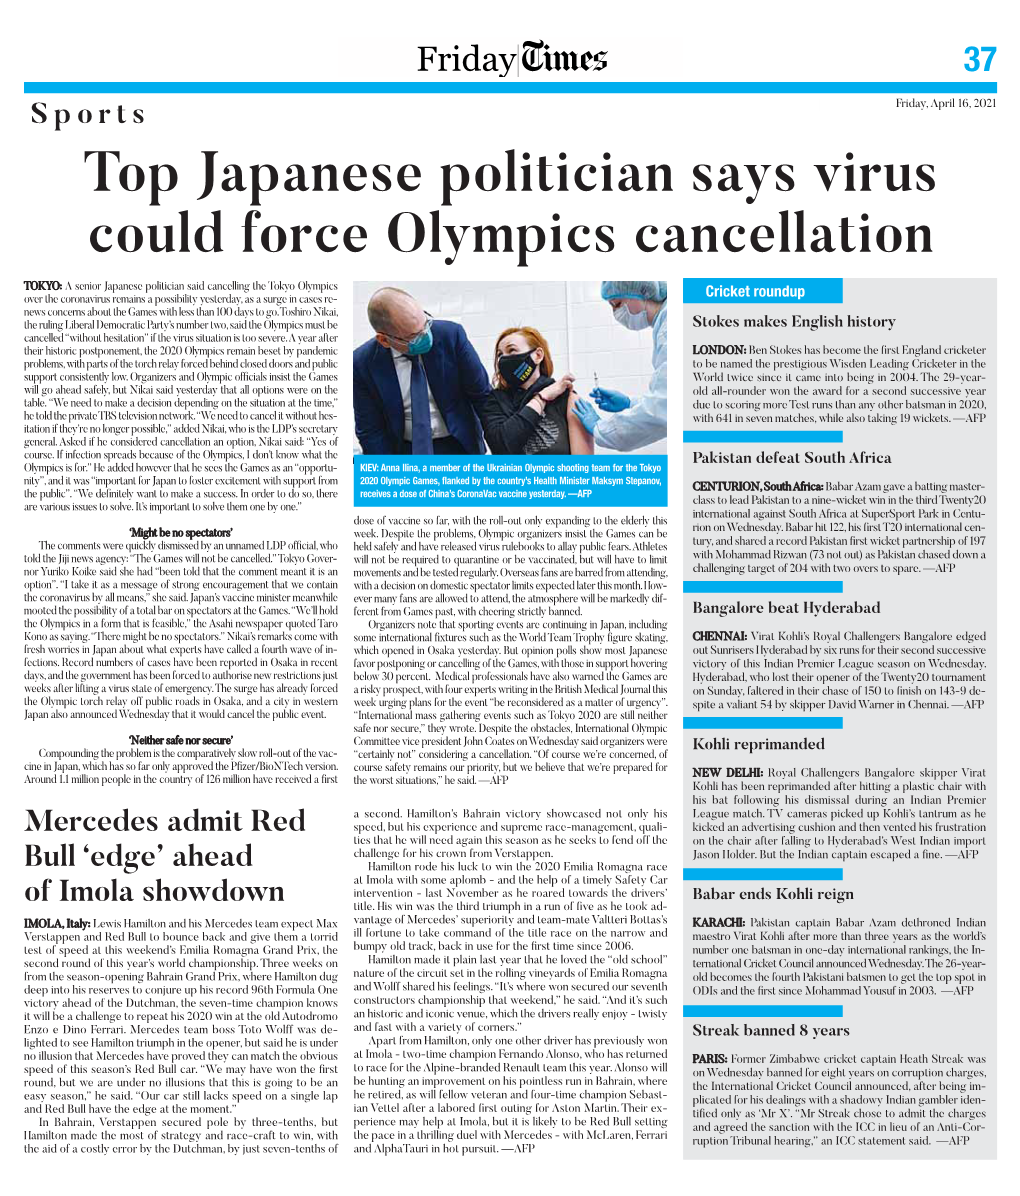 Top Japanese Politician Says Virus Could Force Olympics Cancellation